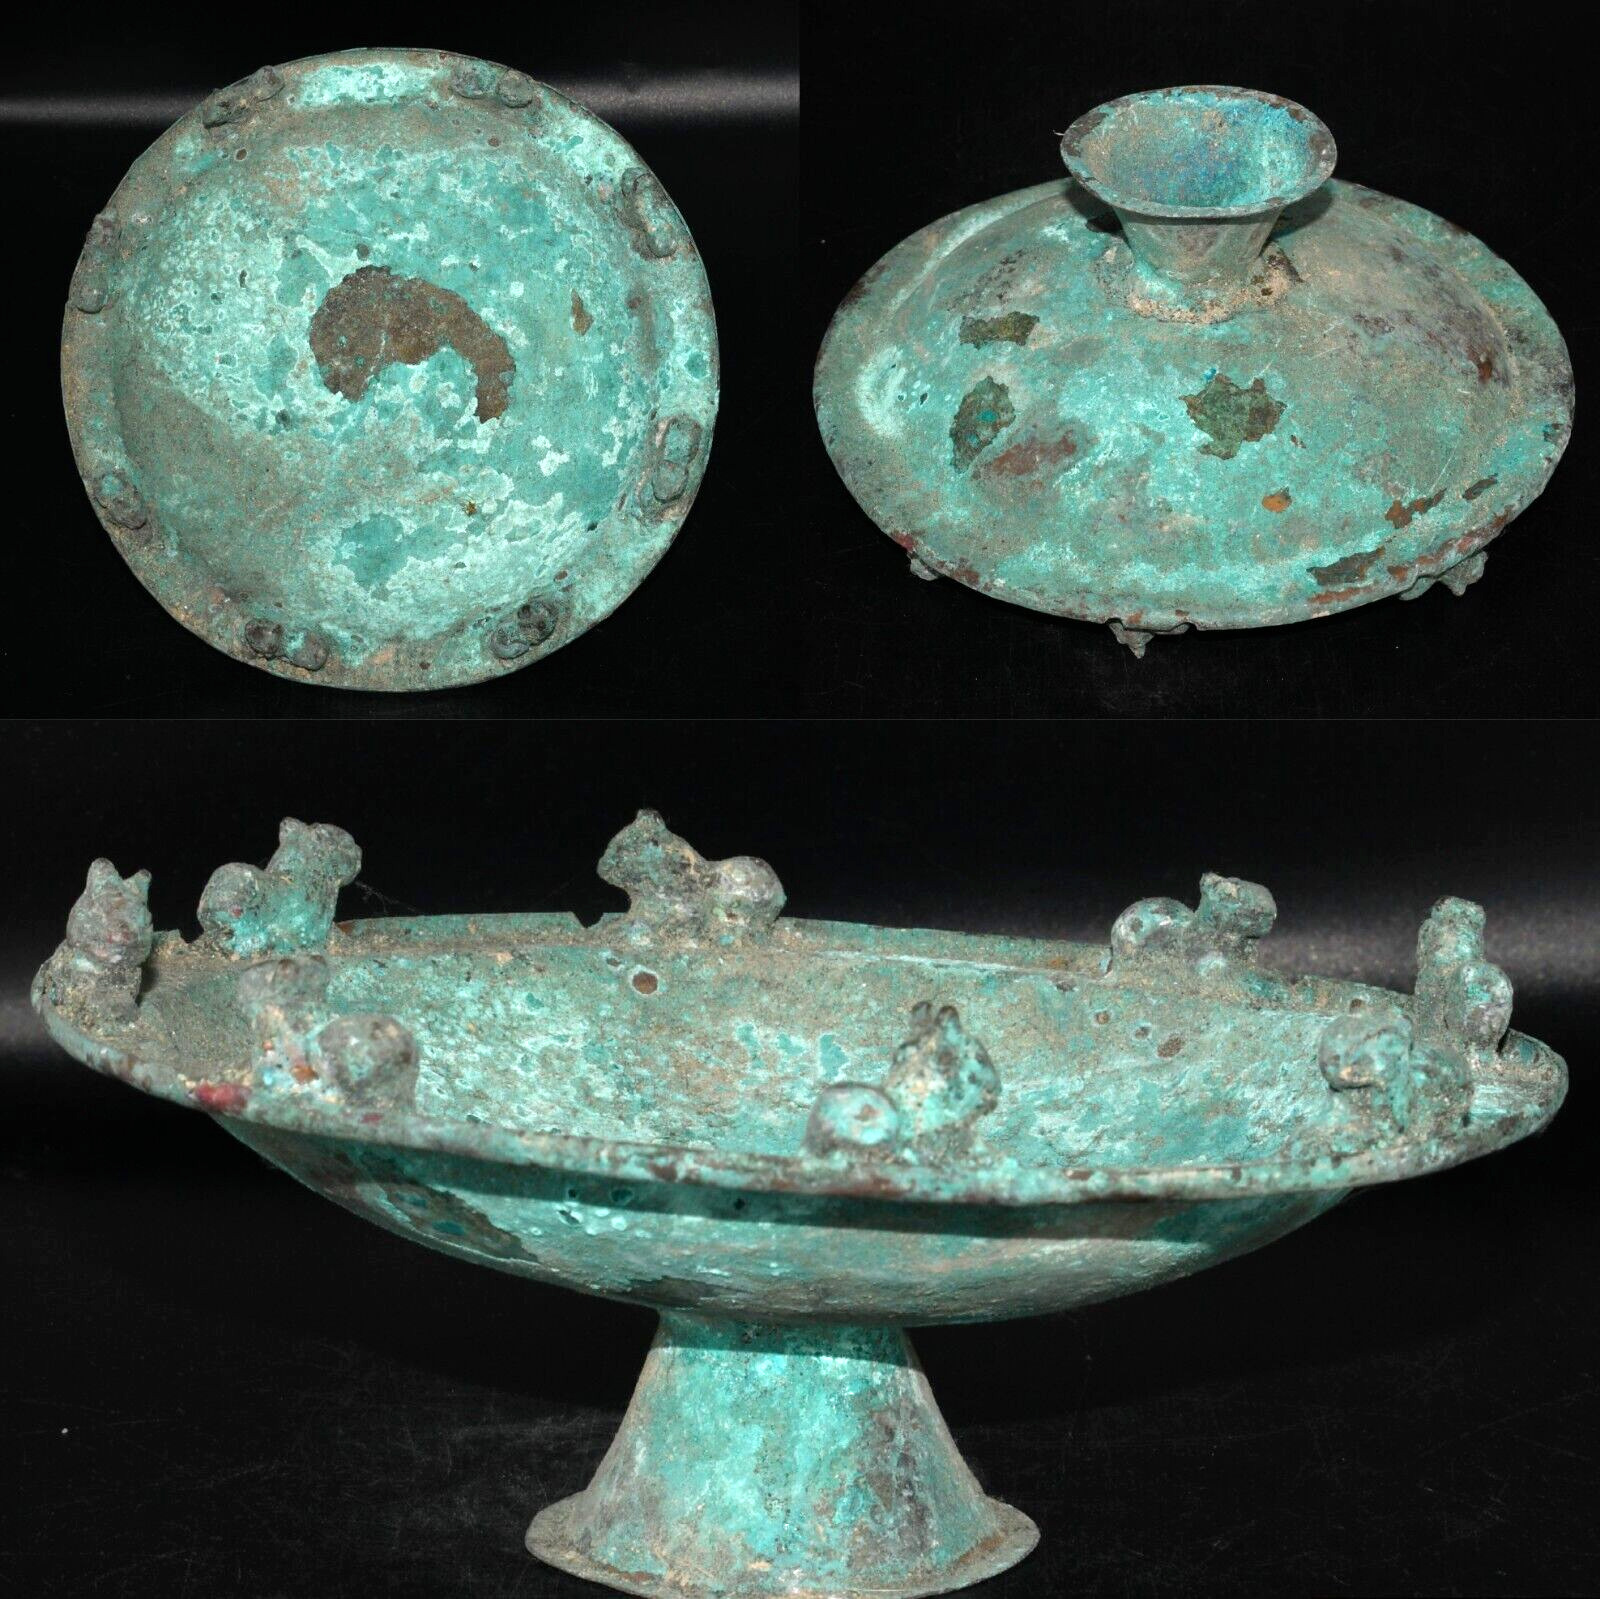 Ancient Bactrian Bronze Bowl With 8 Lion Figurines 3rd–early 2nd millennium BCE